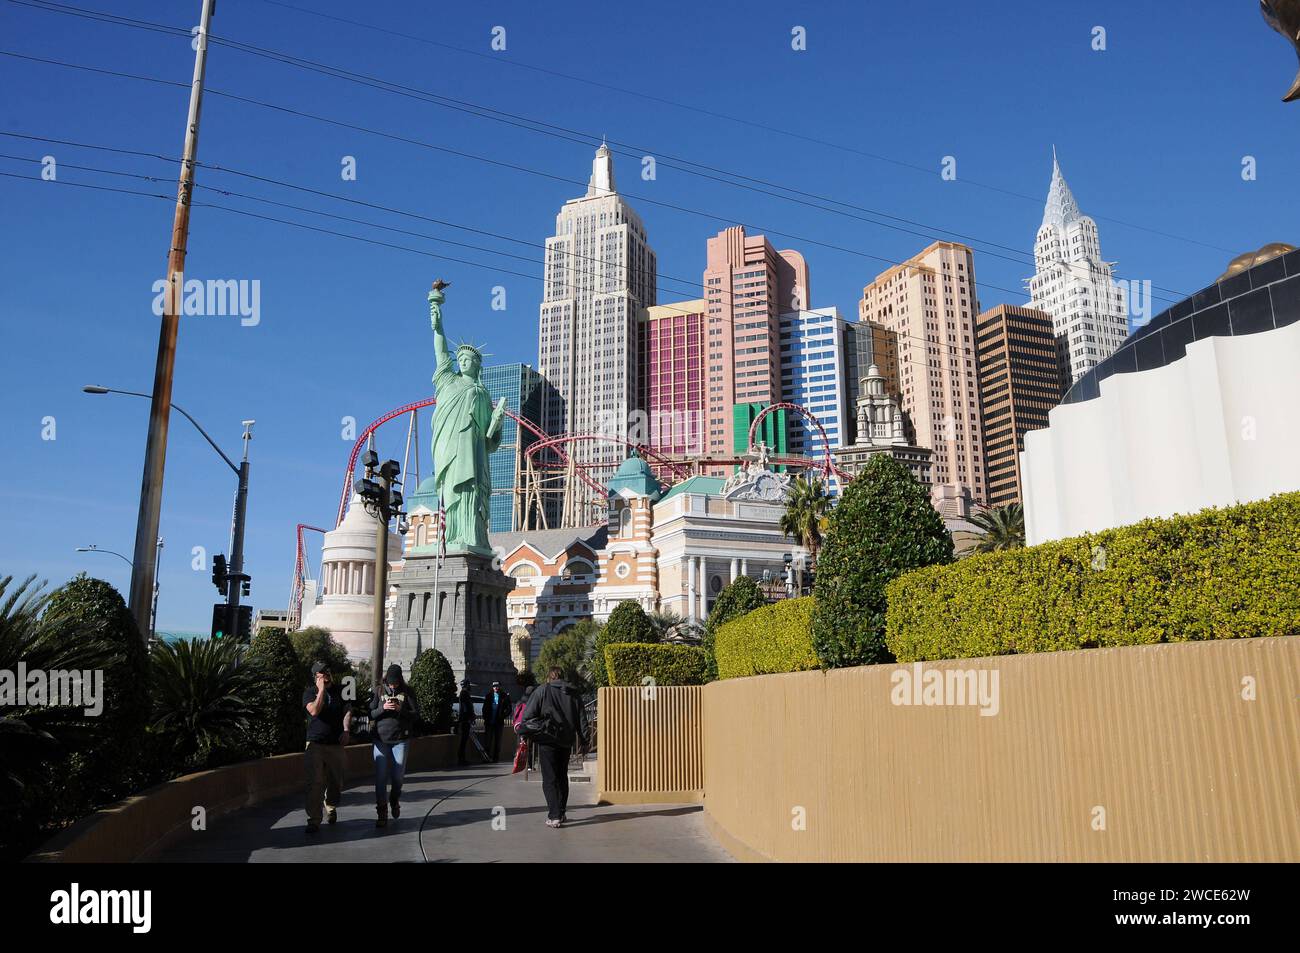 LAS VEGAS / NEVADA/USA 15 December 2017. New york casino and statue of liberty infront casino in Las Vegas ,Nevada. Photo.Francis Dean/Dean Pictures Stock Photo